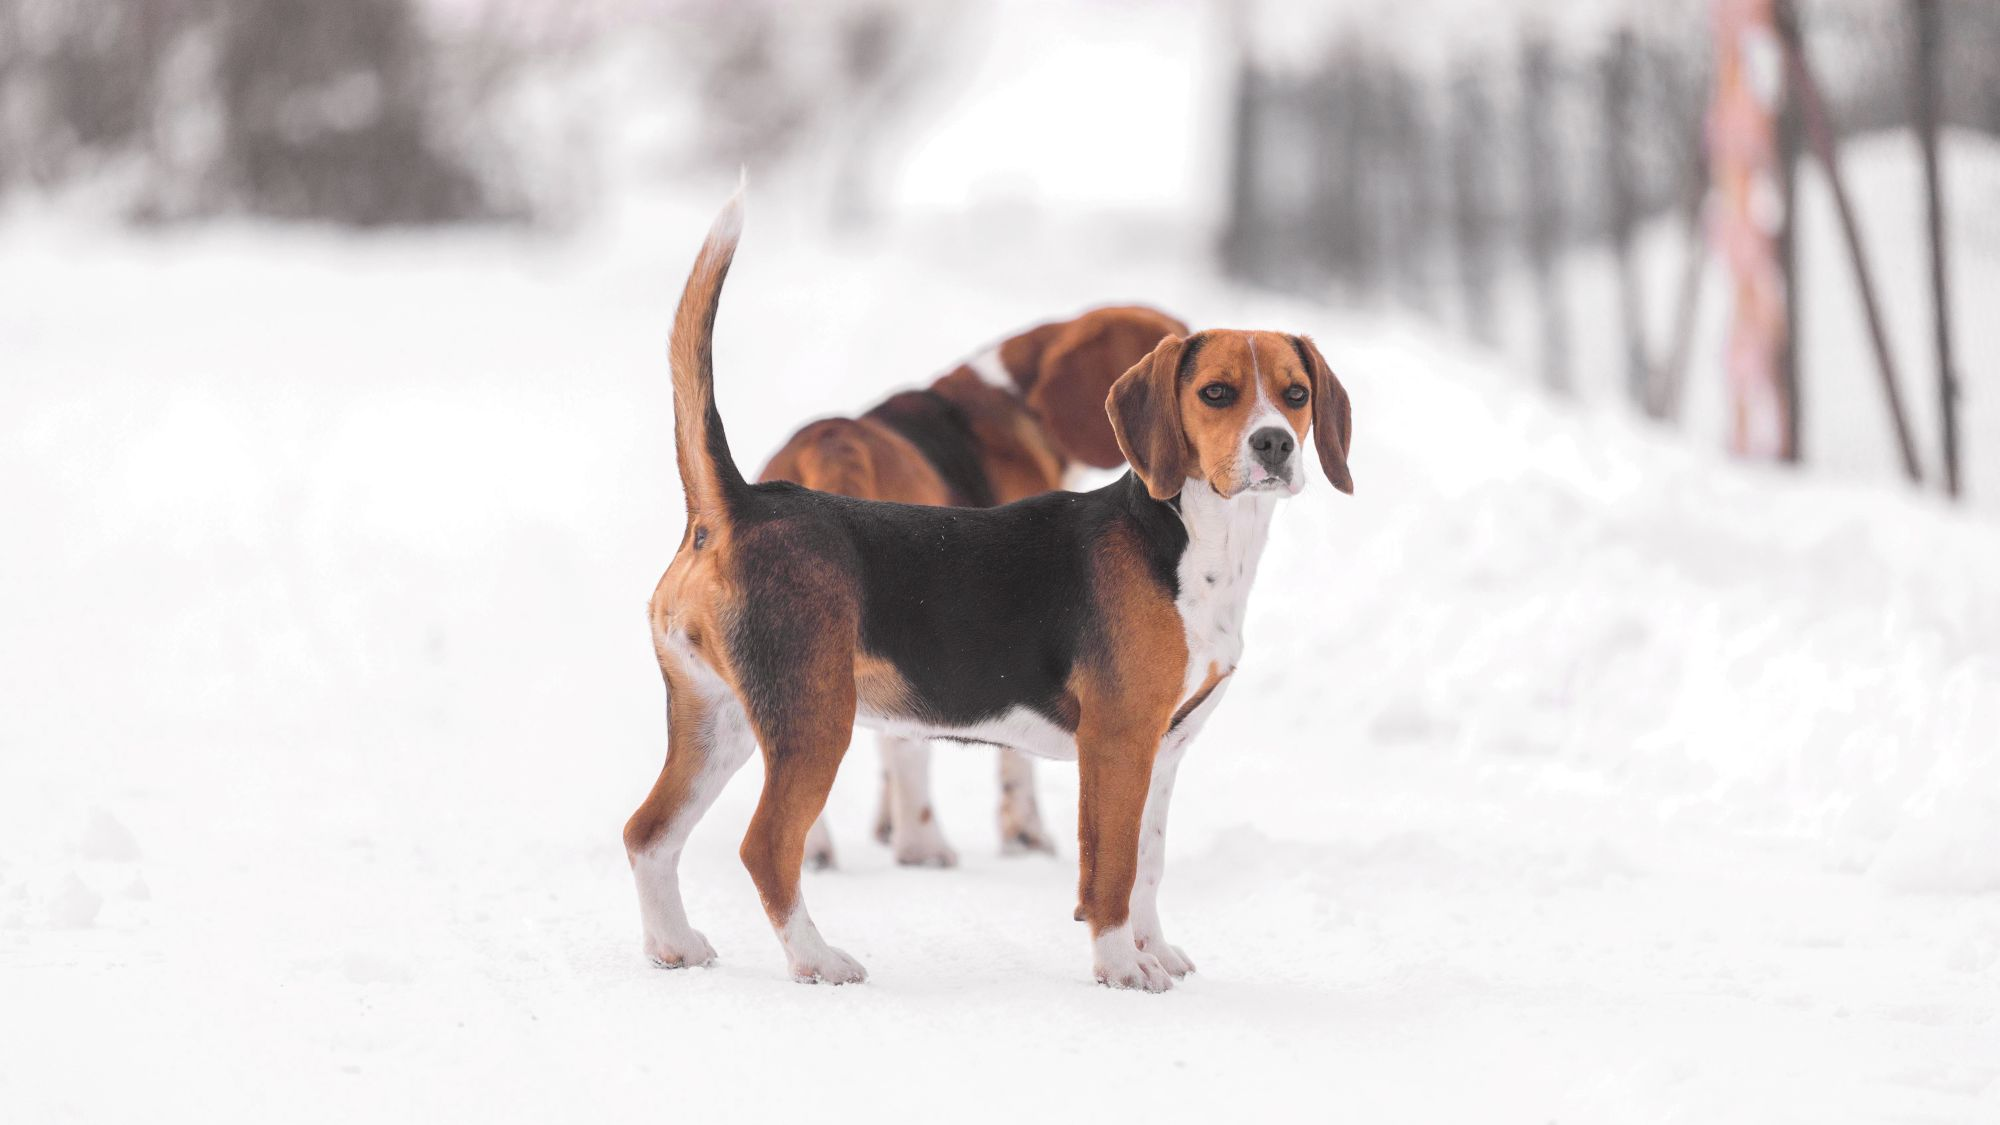 Two Beagle Harriers stood on a snowy track